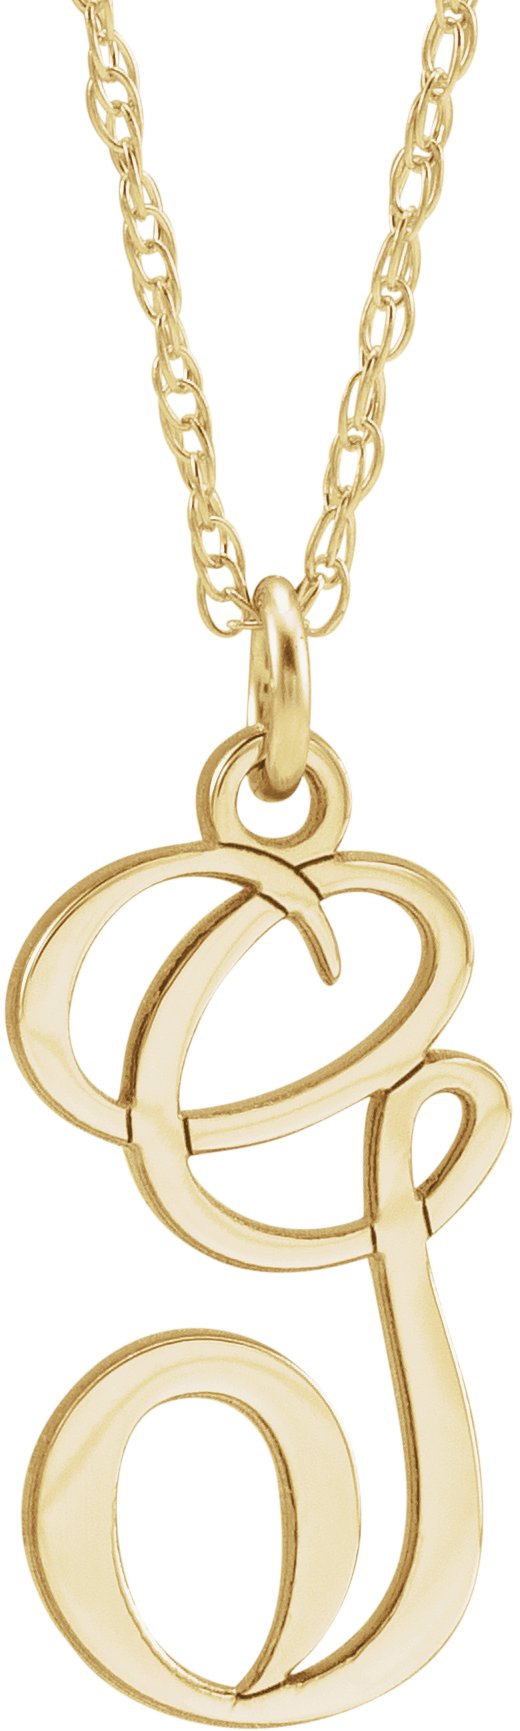 14K Yellow Gold-Plated Sterling Silver Script Initial G 16-18" Necklace